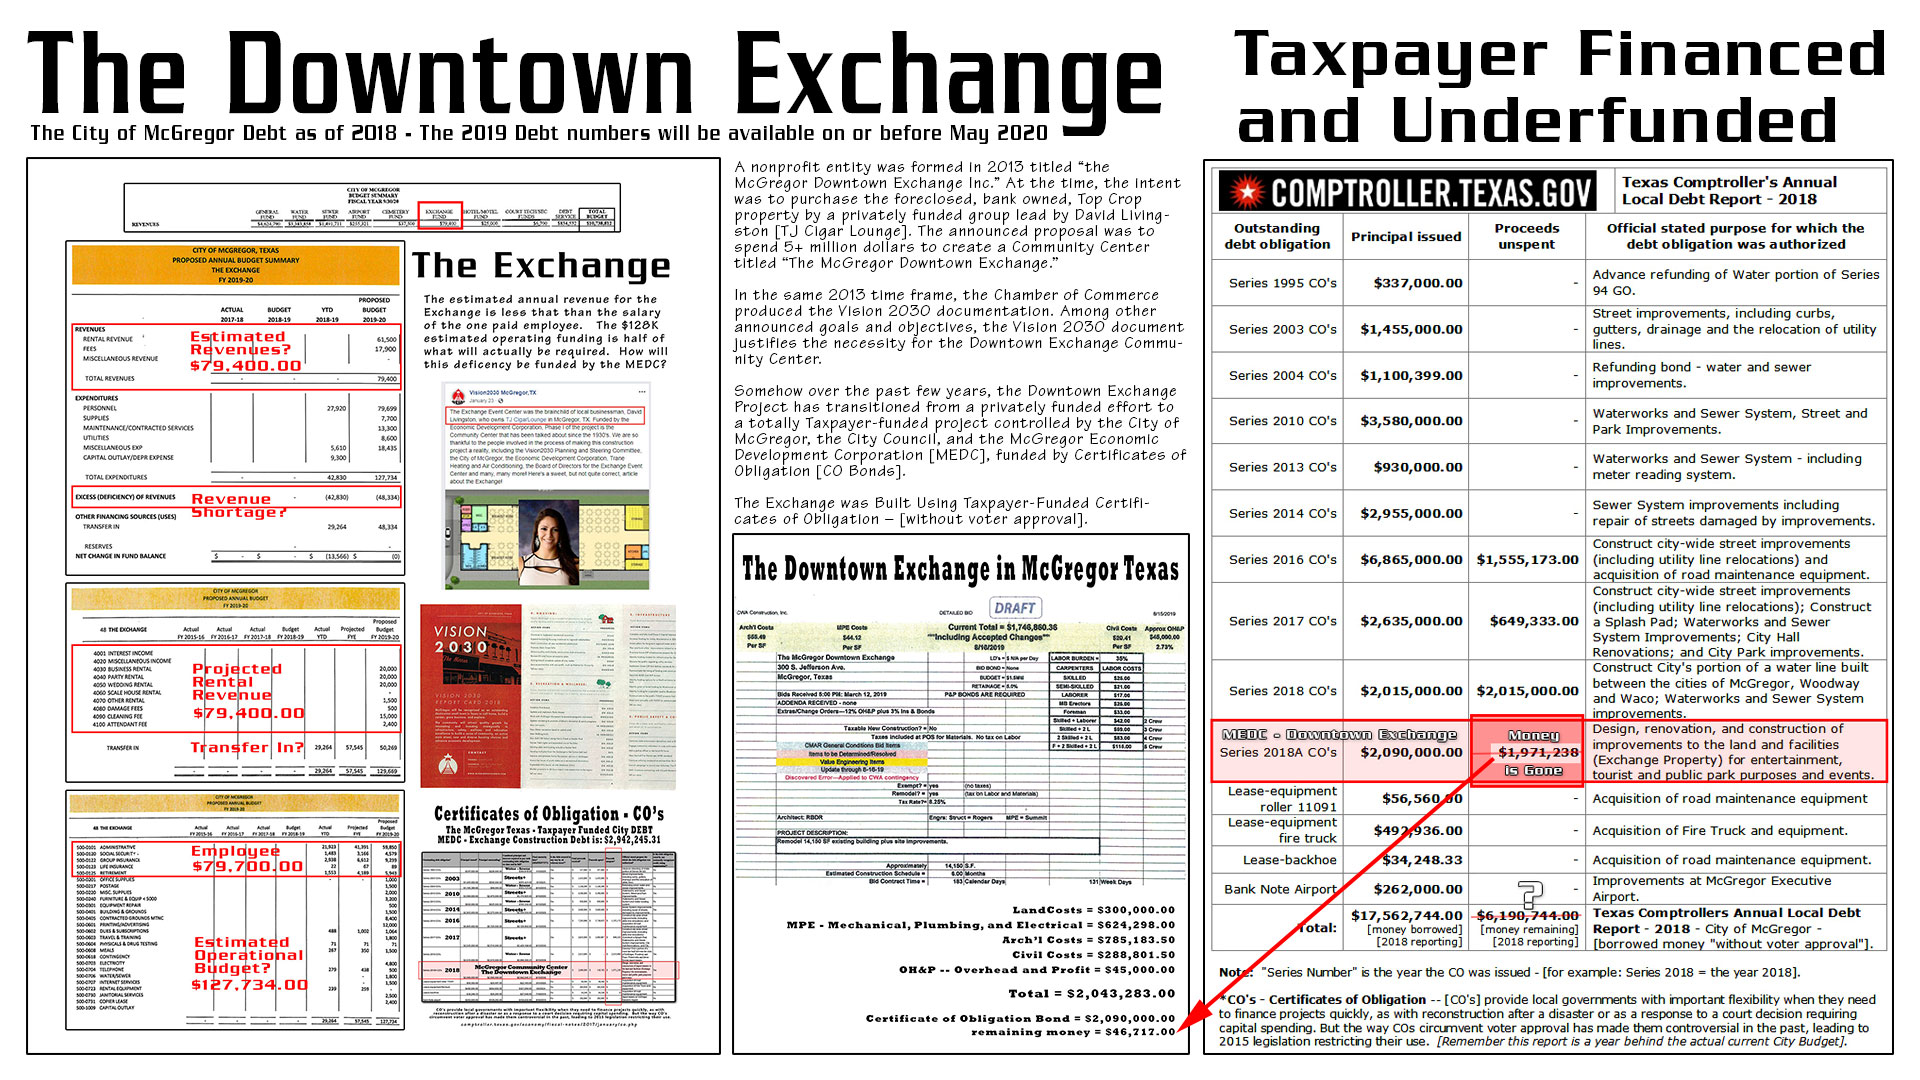 The Downtown Exchange -- [Click to Enlarge - Image Opens in a New Window]